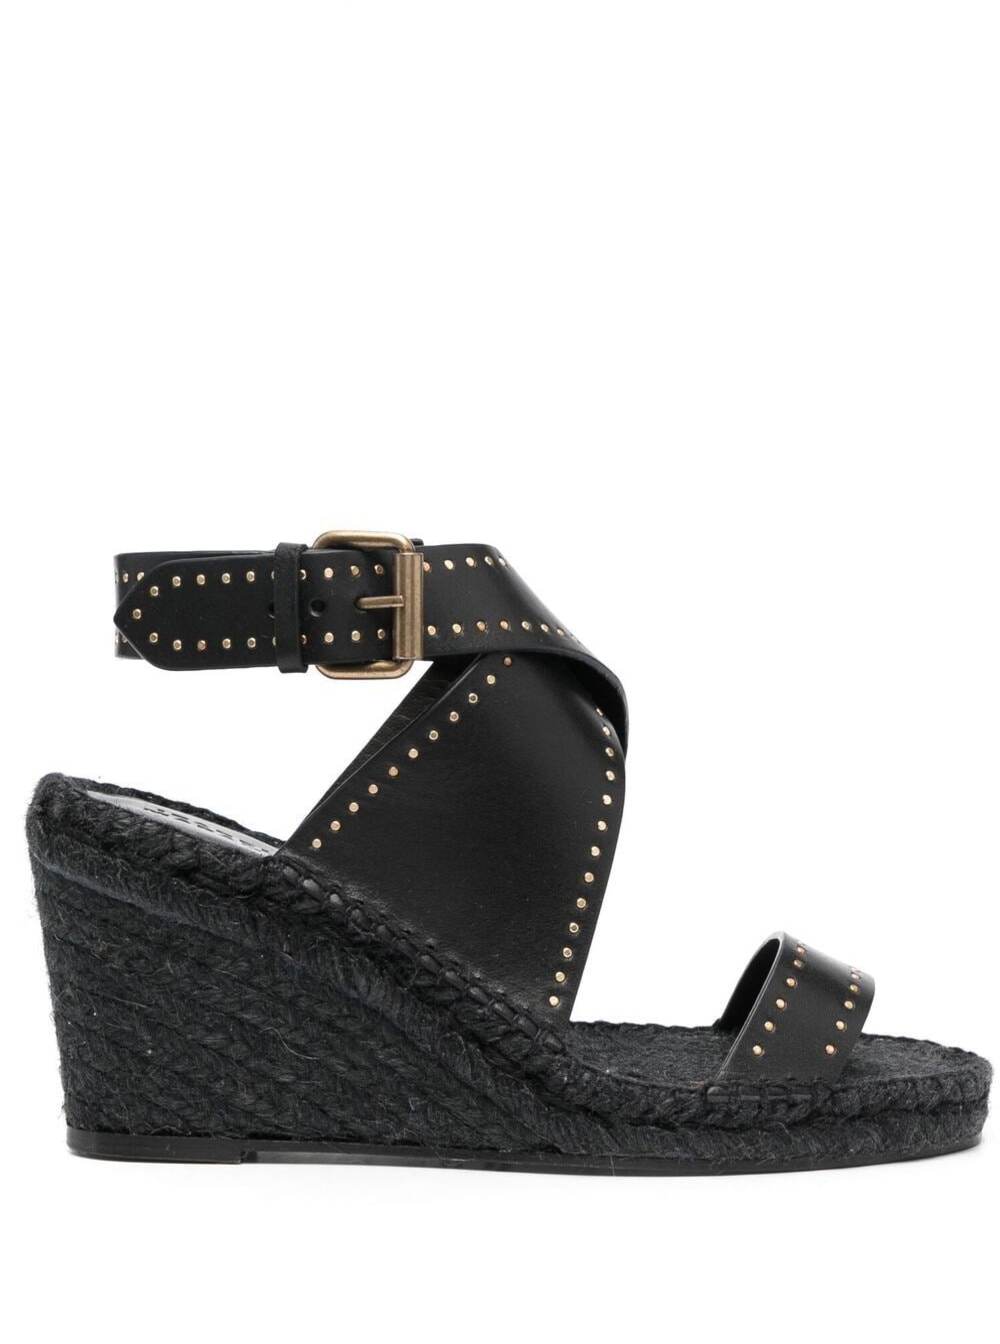 ISABEL MARANT BLACK ESPADRILLE WEDGE SANDALS IN LEATHER WOMAN